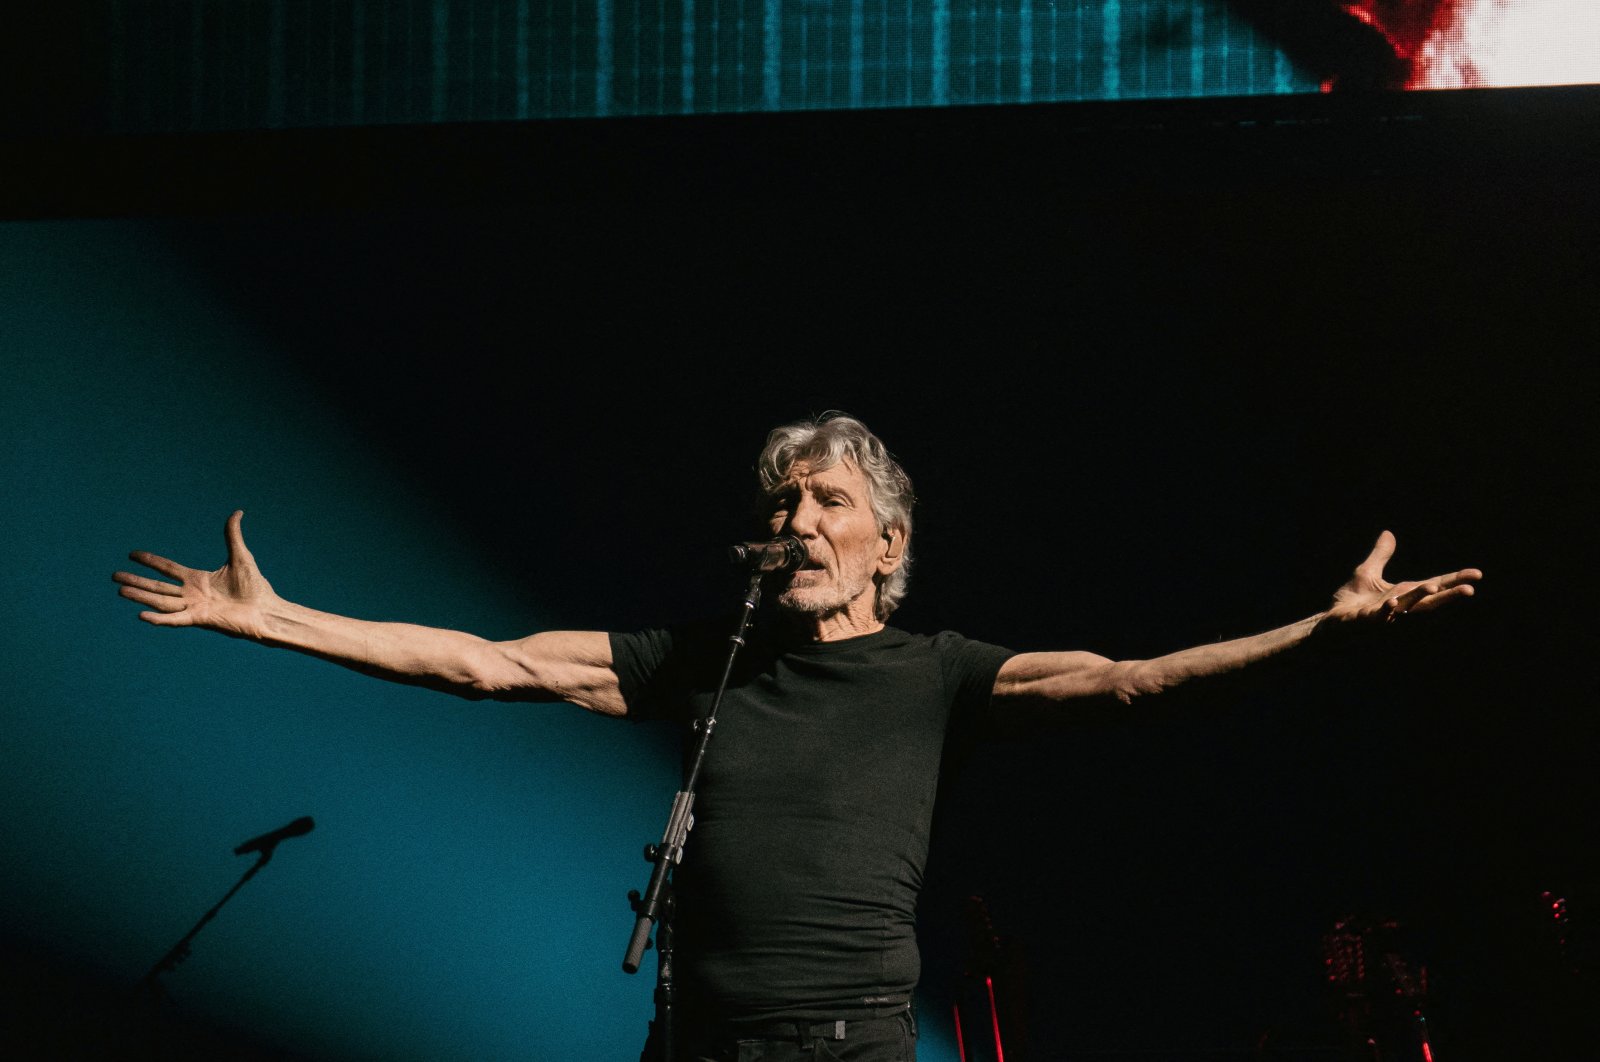 Roger Waters' Krakow concert canceled due to his Russia bias